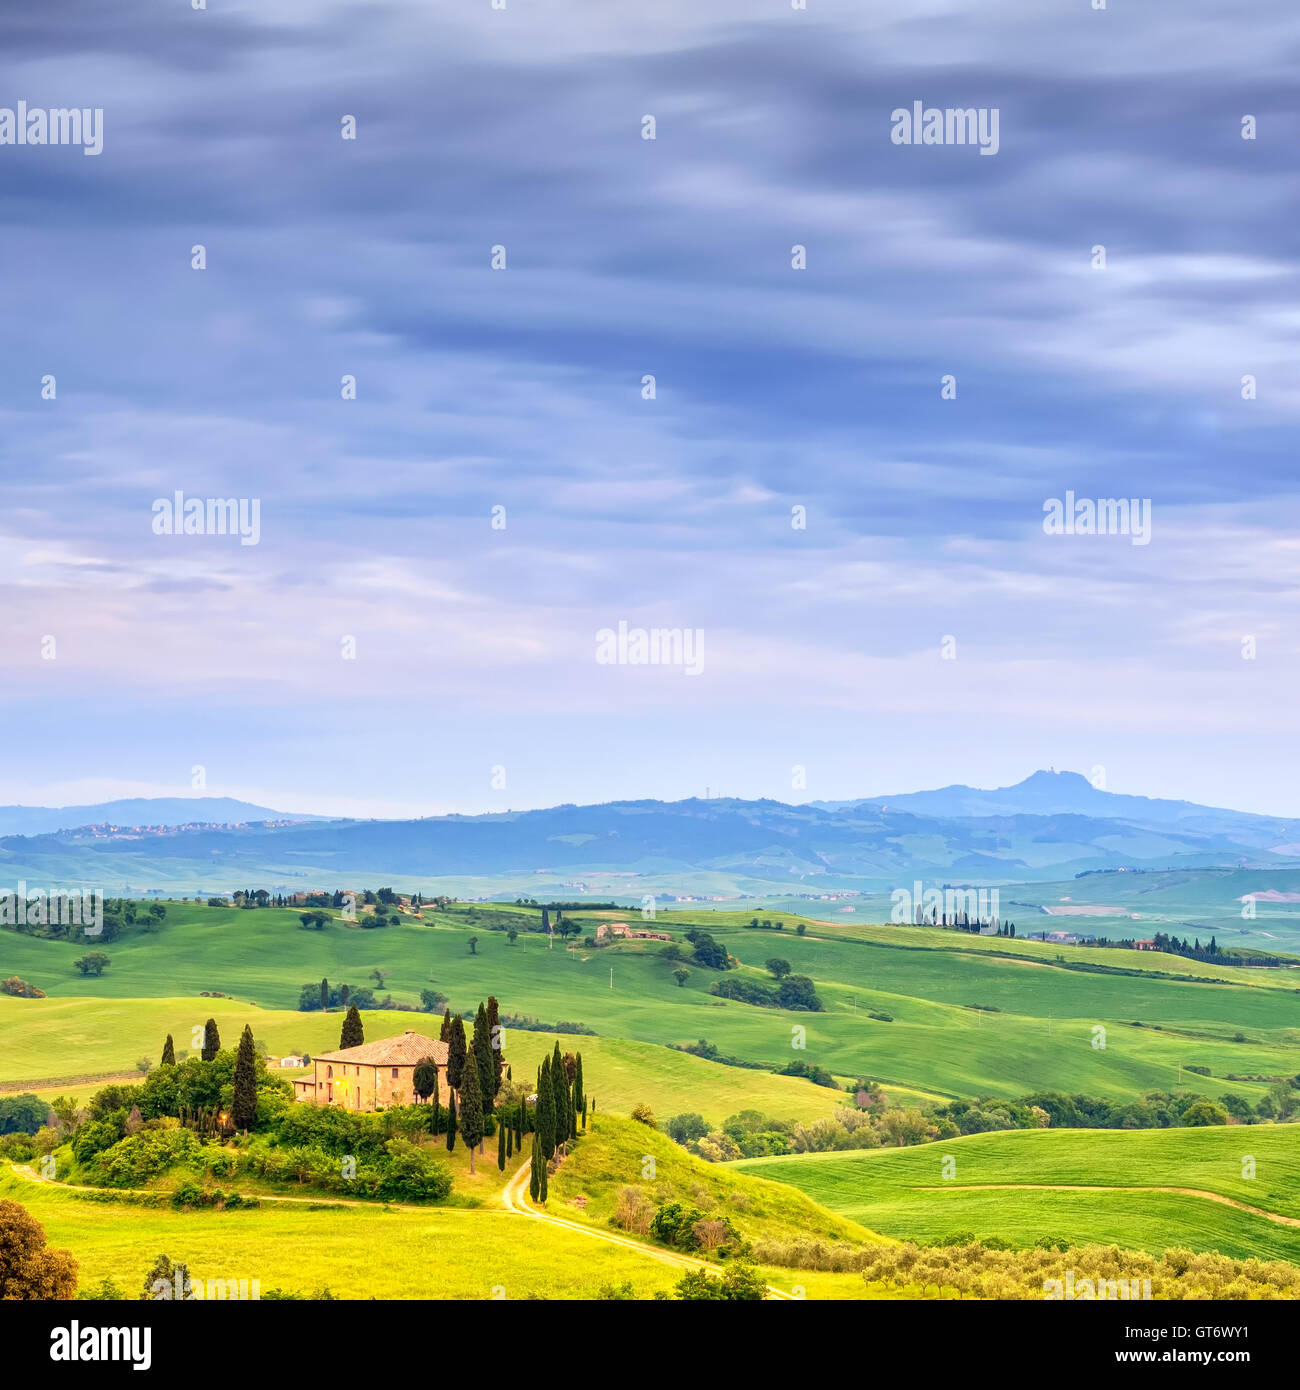 Tuscany, farmland and cypress trees country landscape, green fields. San Quirico Orcia, Italy, Europe. Stock Photo